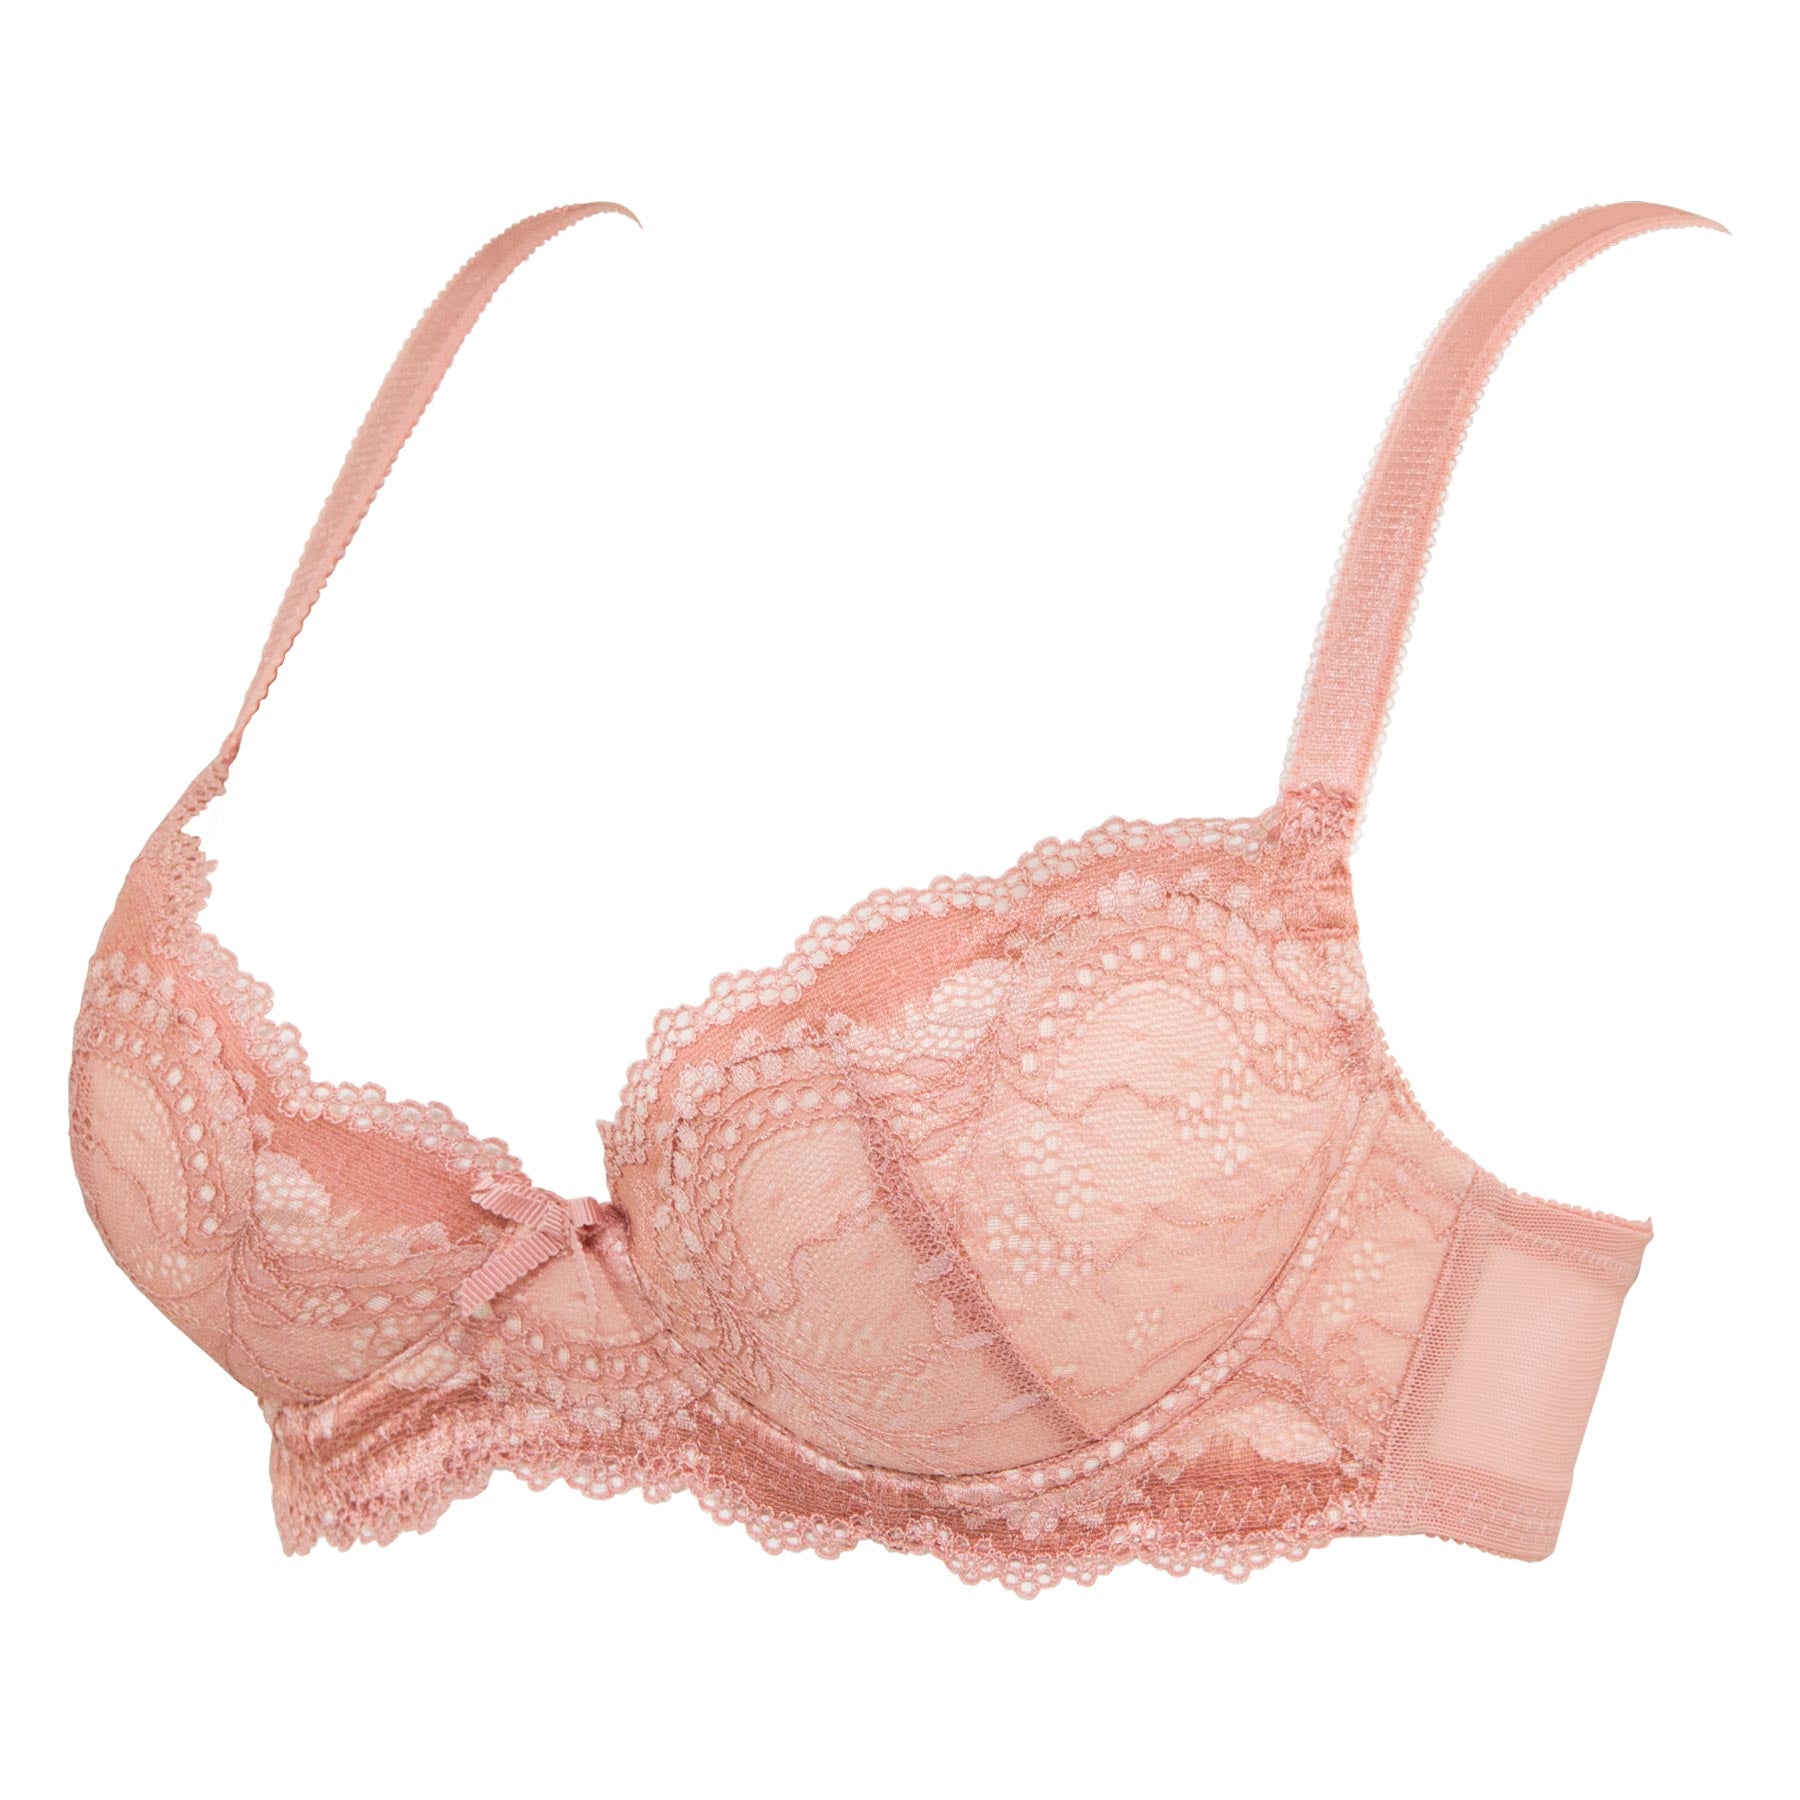 Victoria's Secret PINK - It's time! Buy one bra, take 50% off your